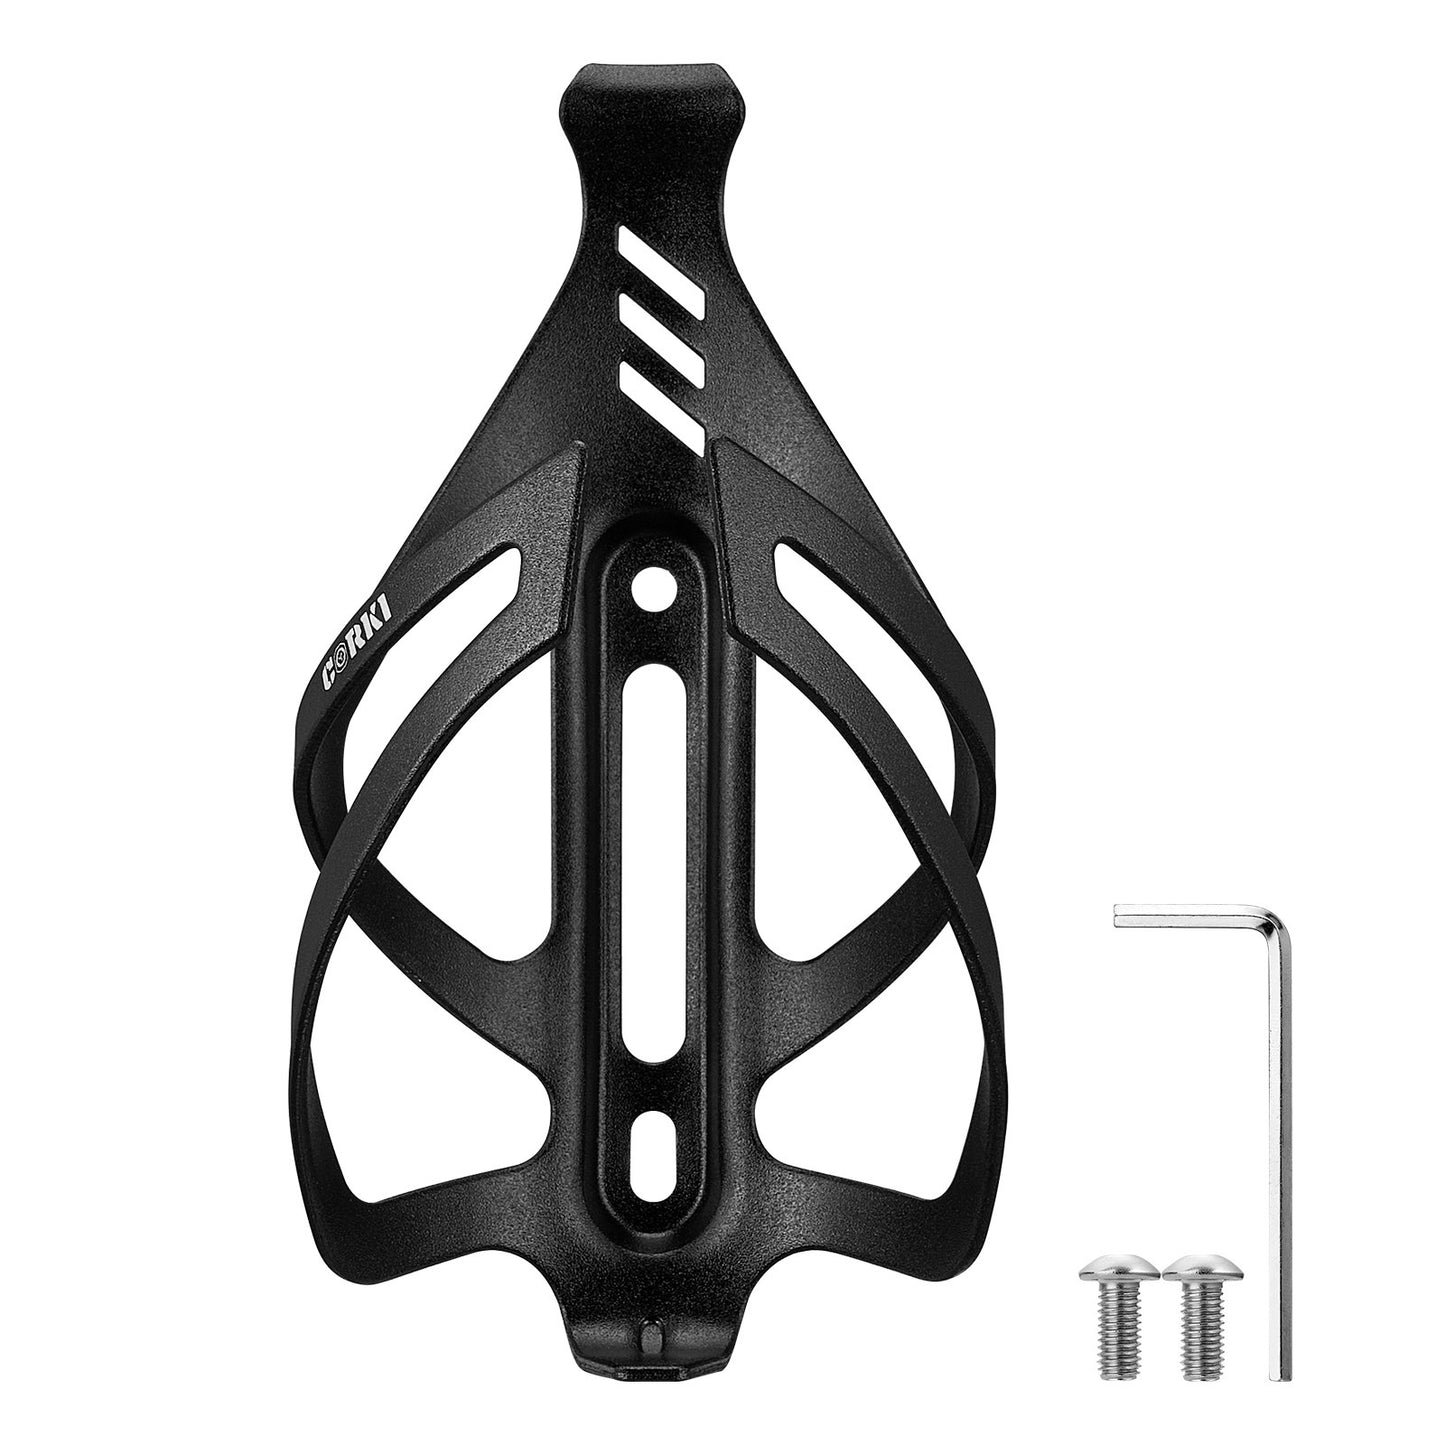 Aluminum Bicycle Water Bottle Cage - Center Cage Entry - Corki Cycles